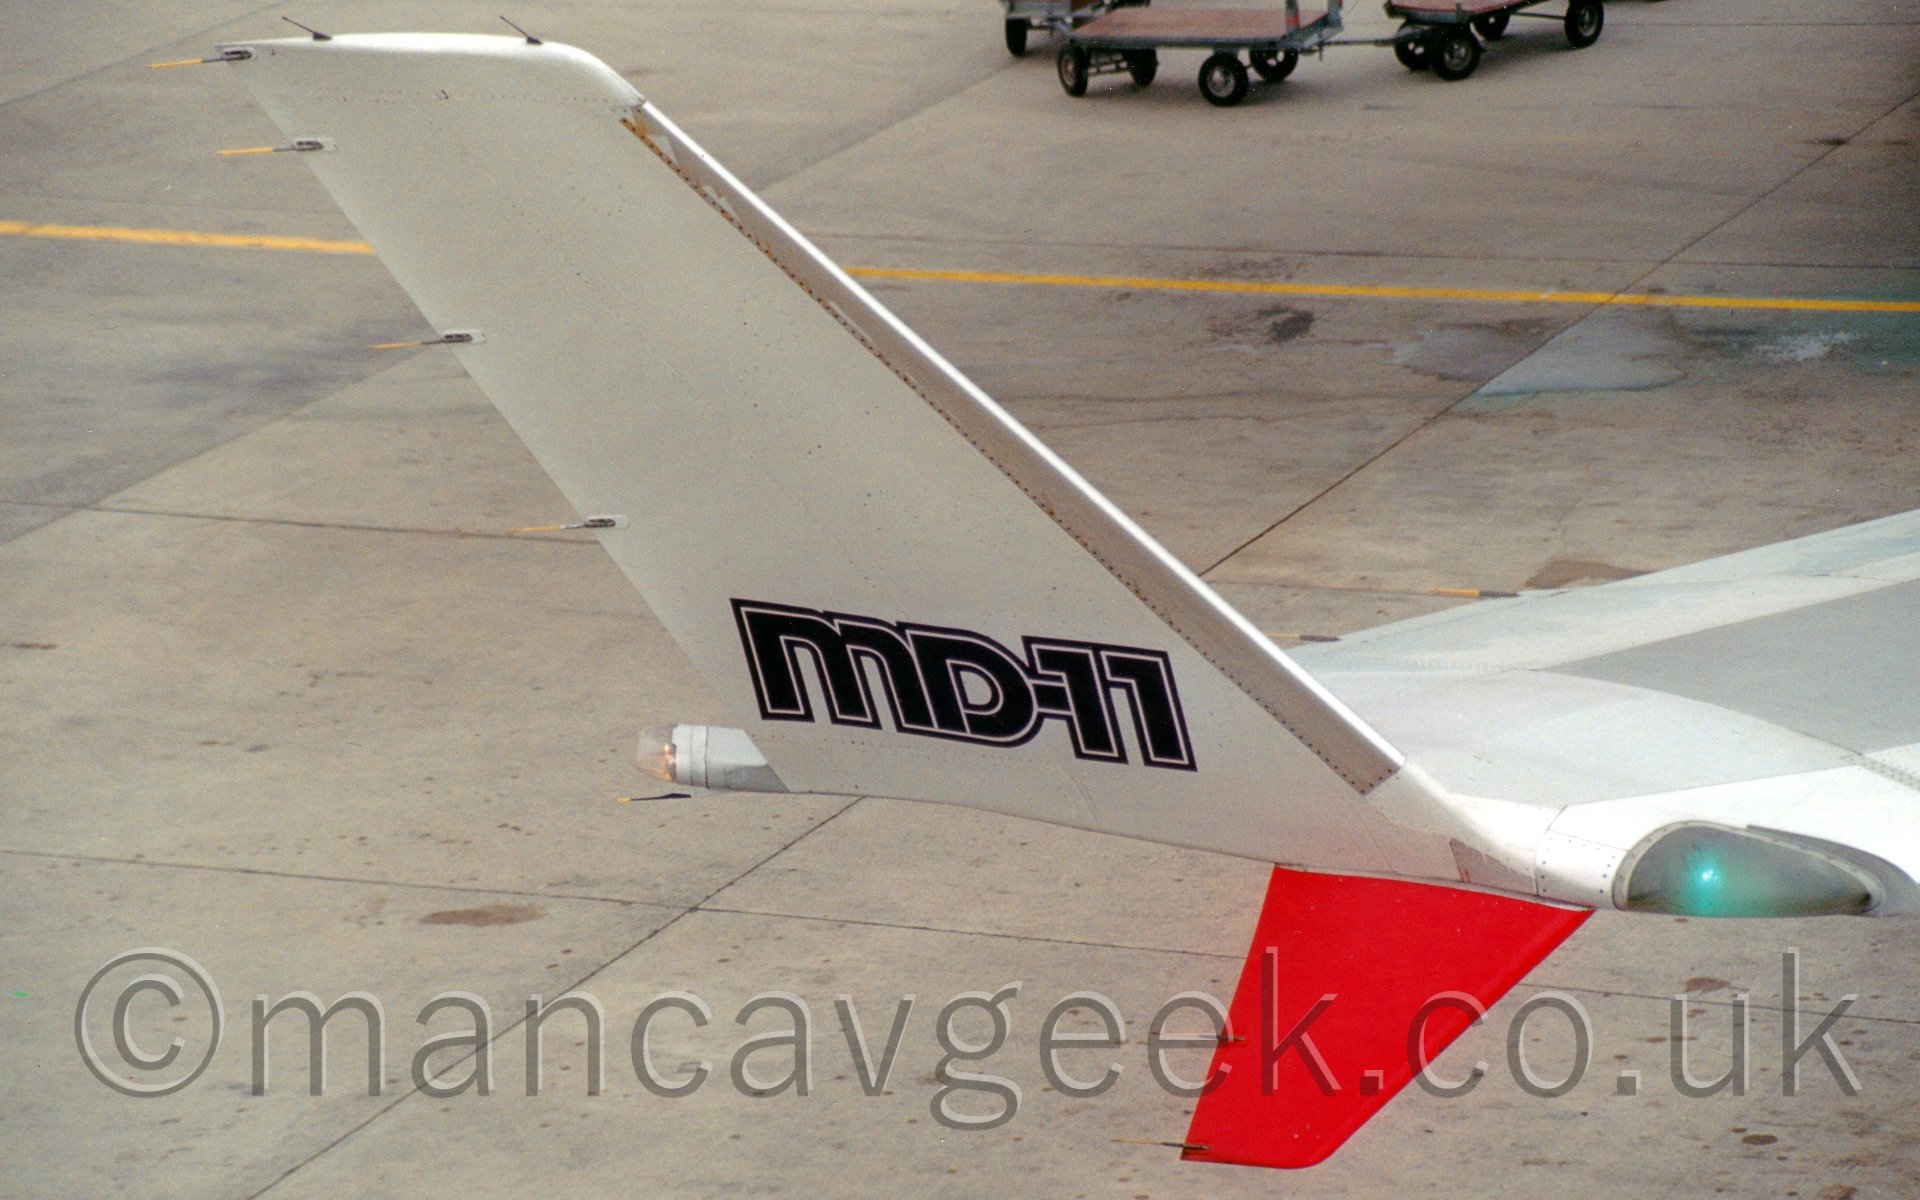 Closeup of the upturned wingtip of a jet airliner facing to the right, with black "MD-11" titles, a red downturned section, and a flashing green light at the front.